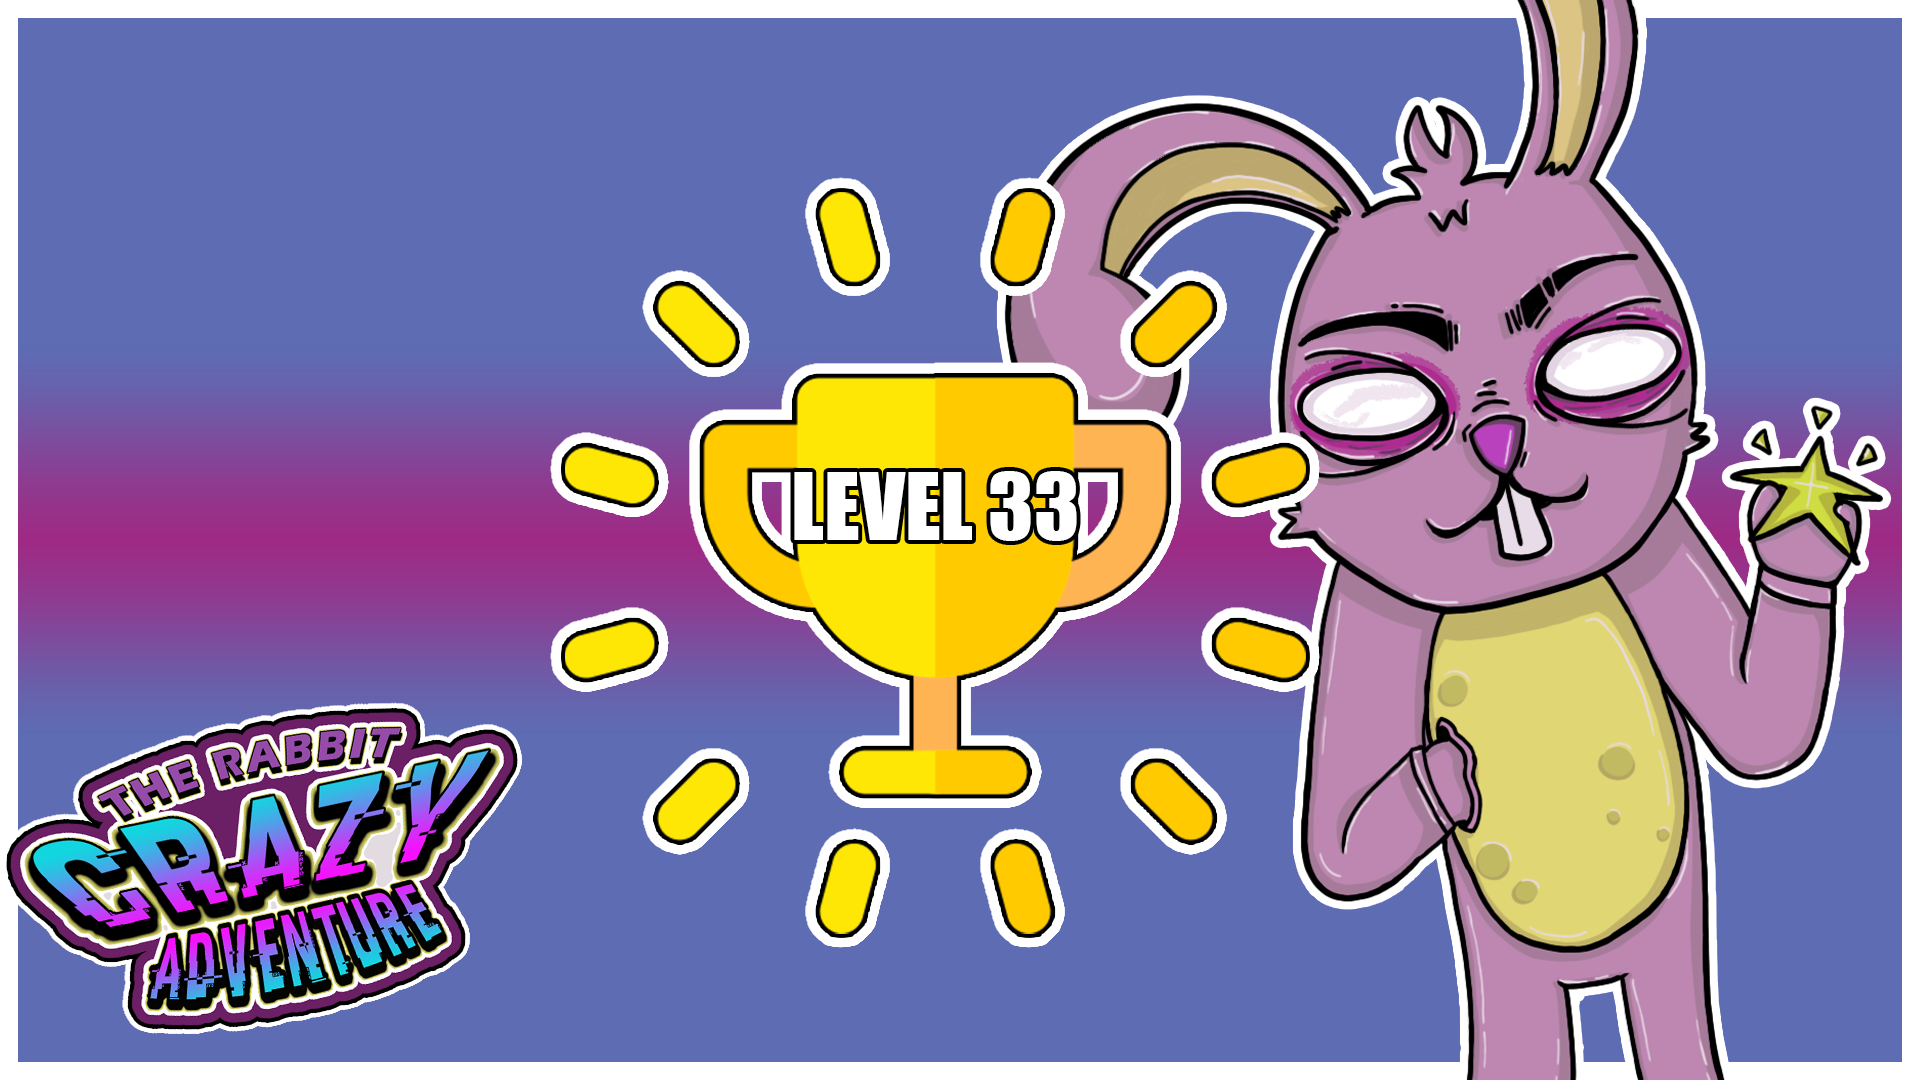 Icon for LEVEL 33